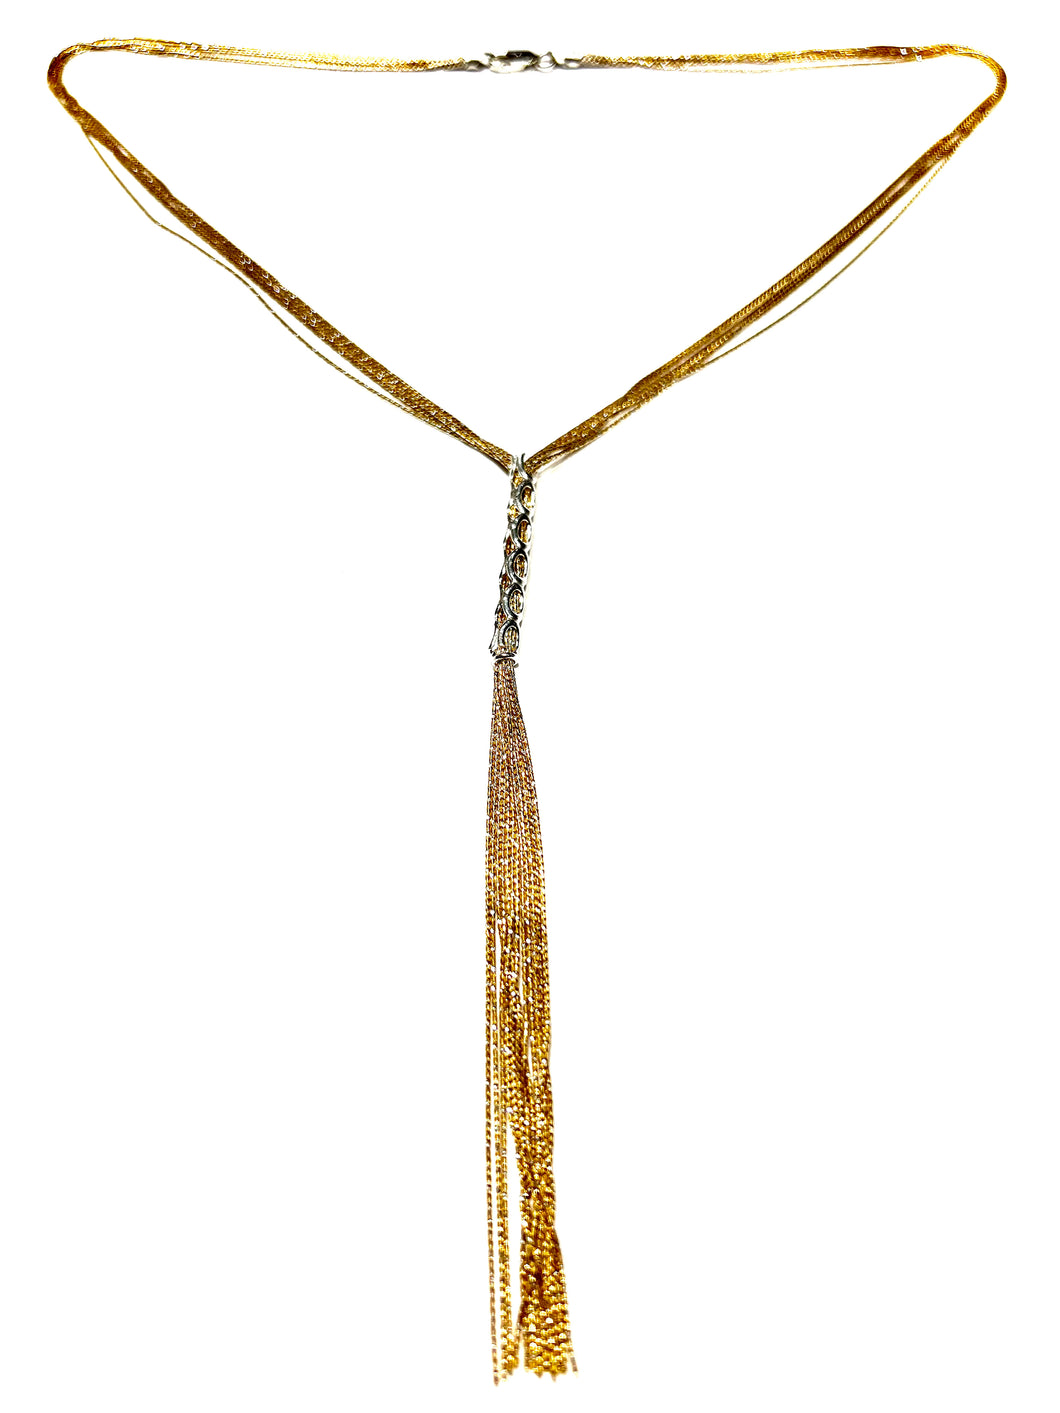 Silver gold Lariat Necklace